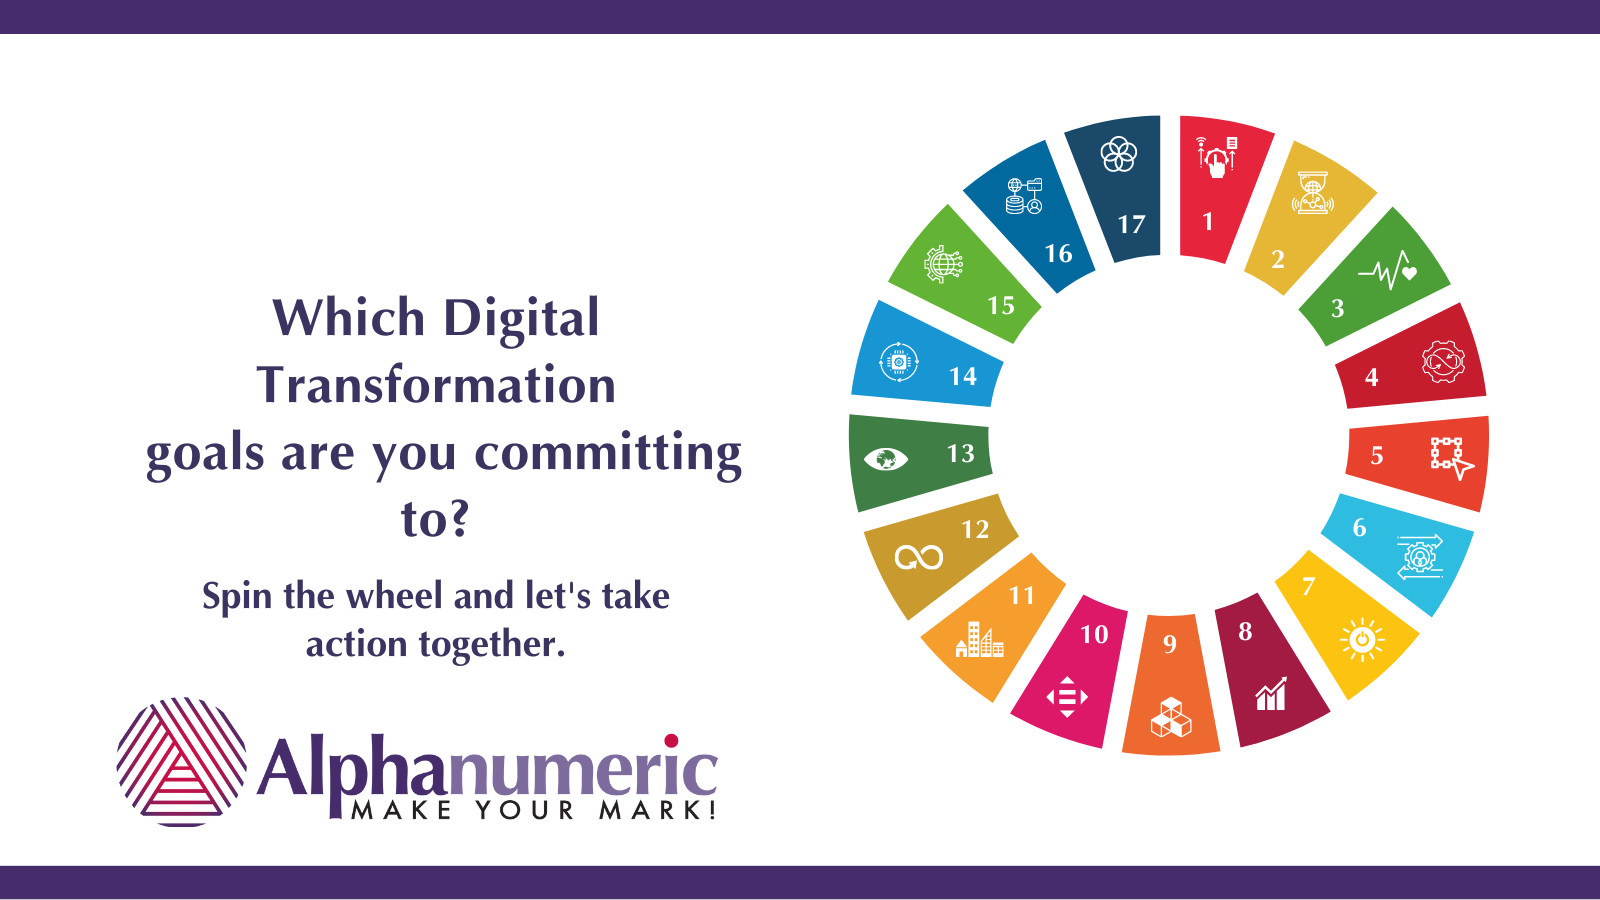 Which Digital Transformation Goals are you committing to? Spin the wheel and let's take action together. Alphanumeric Make Your Mark!